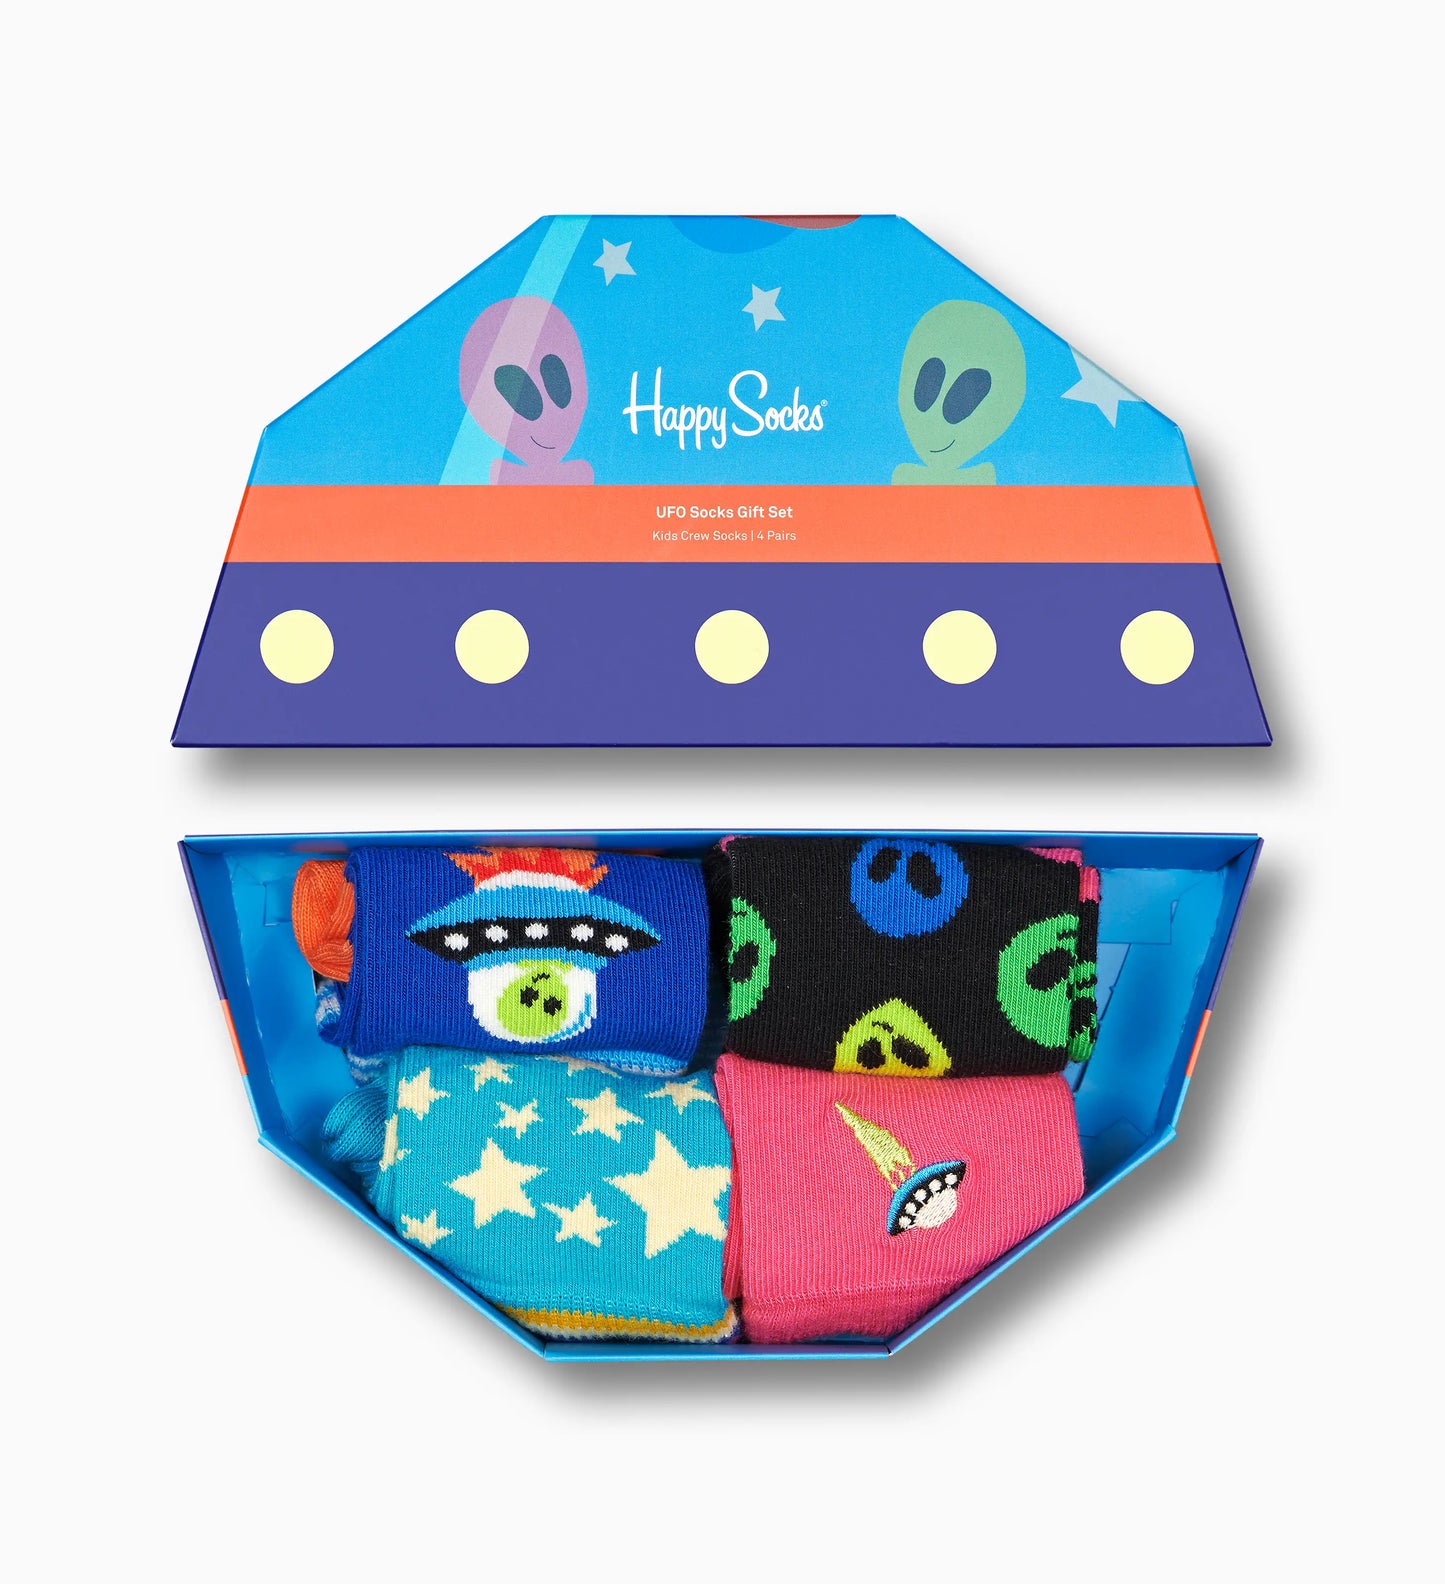 CALZE INFANT SPACE GIFT SET 4-PACK